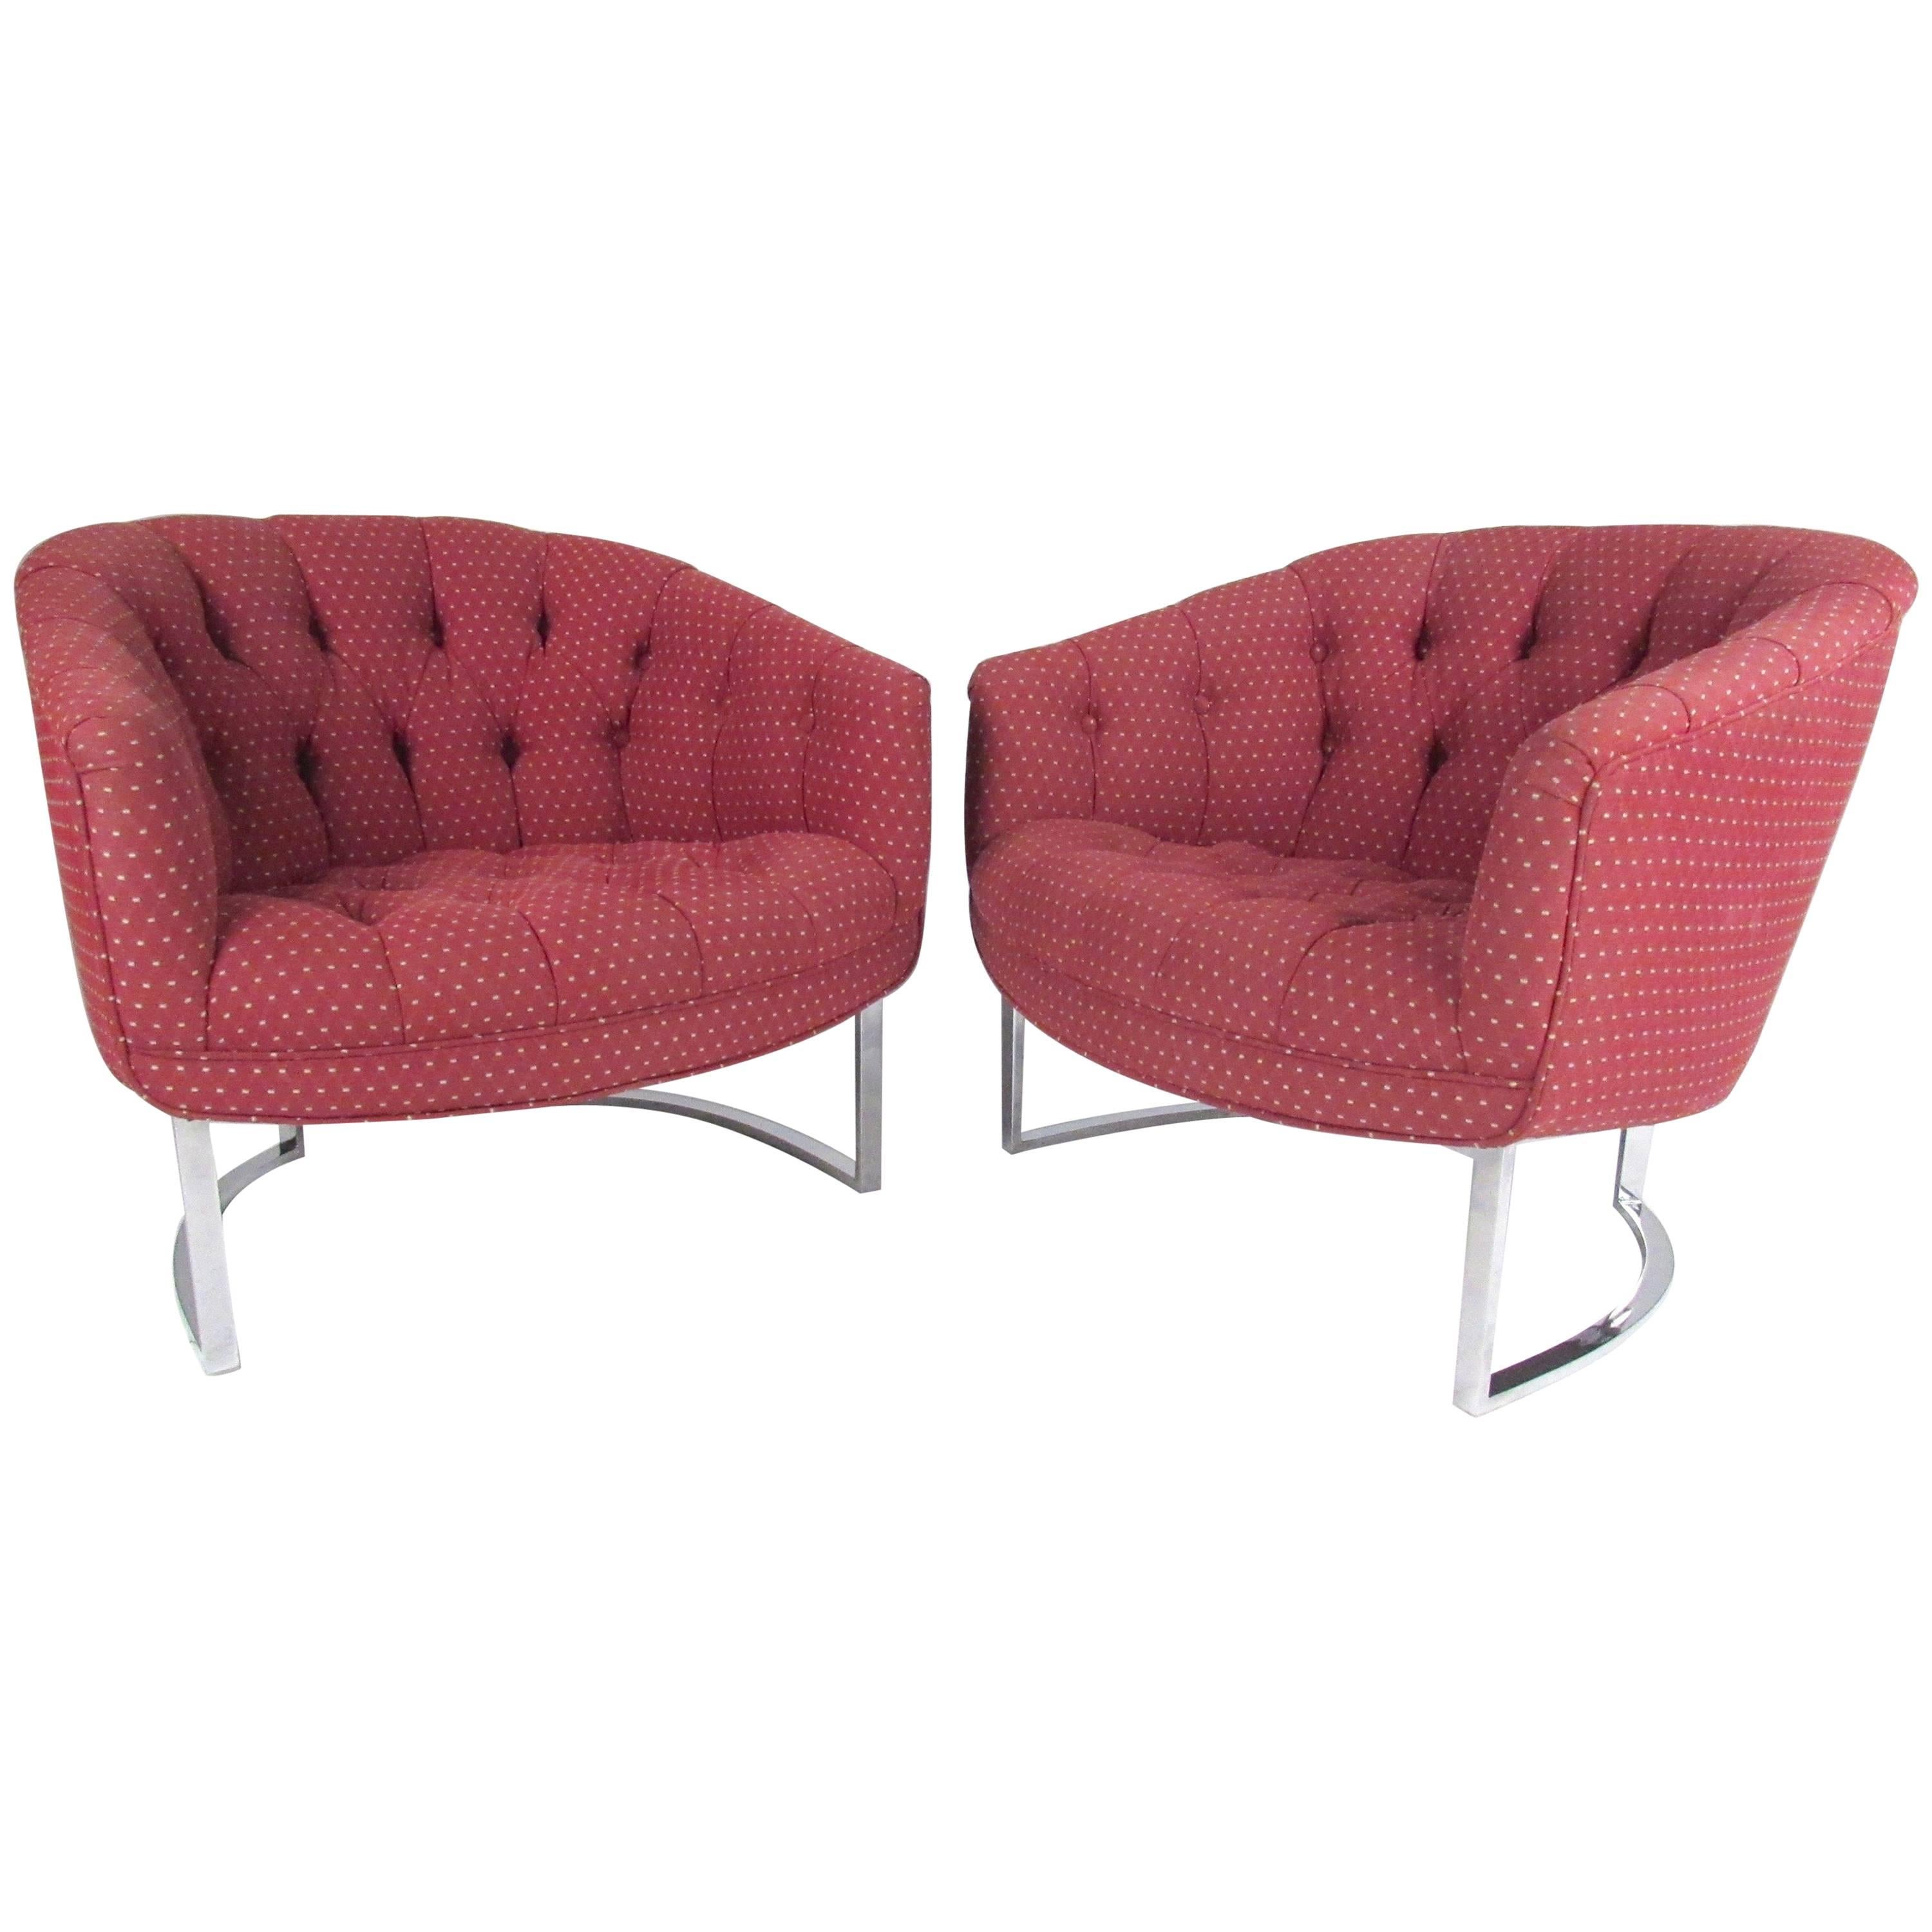 Pair of Vintage Modern Lounge Chairs after Milo Baughman